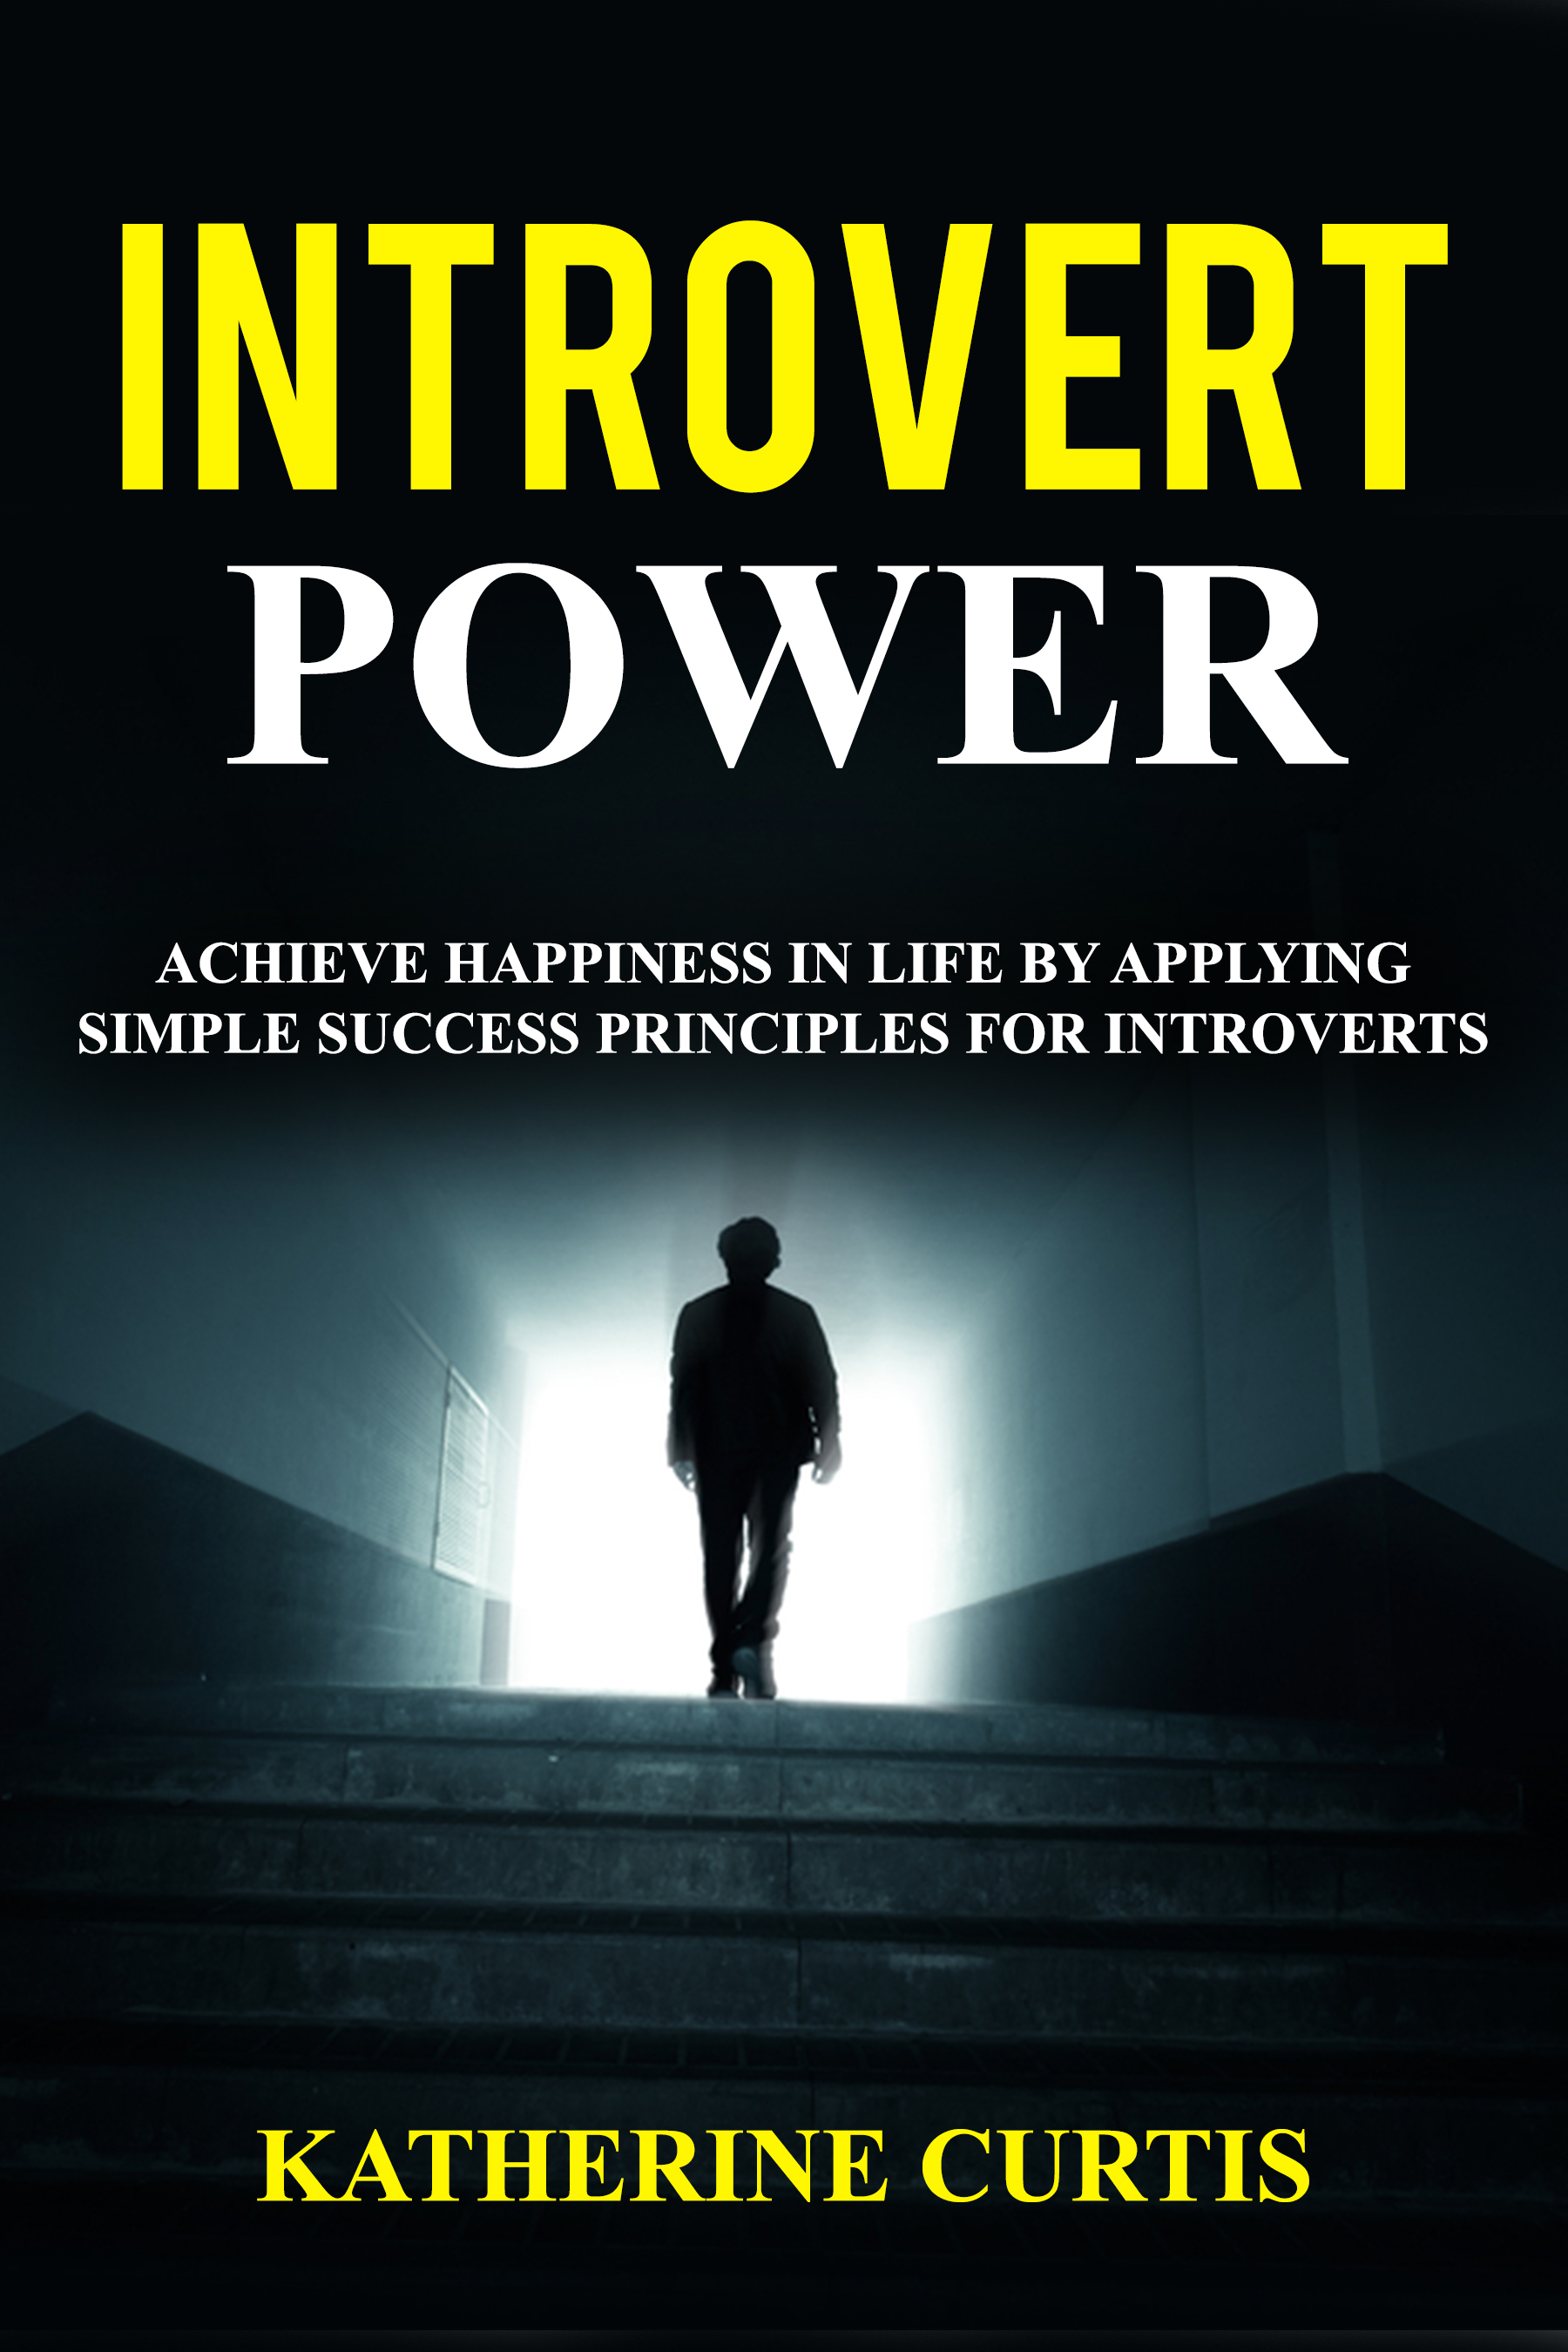 FREE: Introvert Power by Katherine Curtis